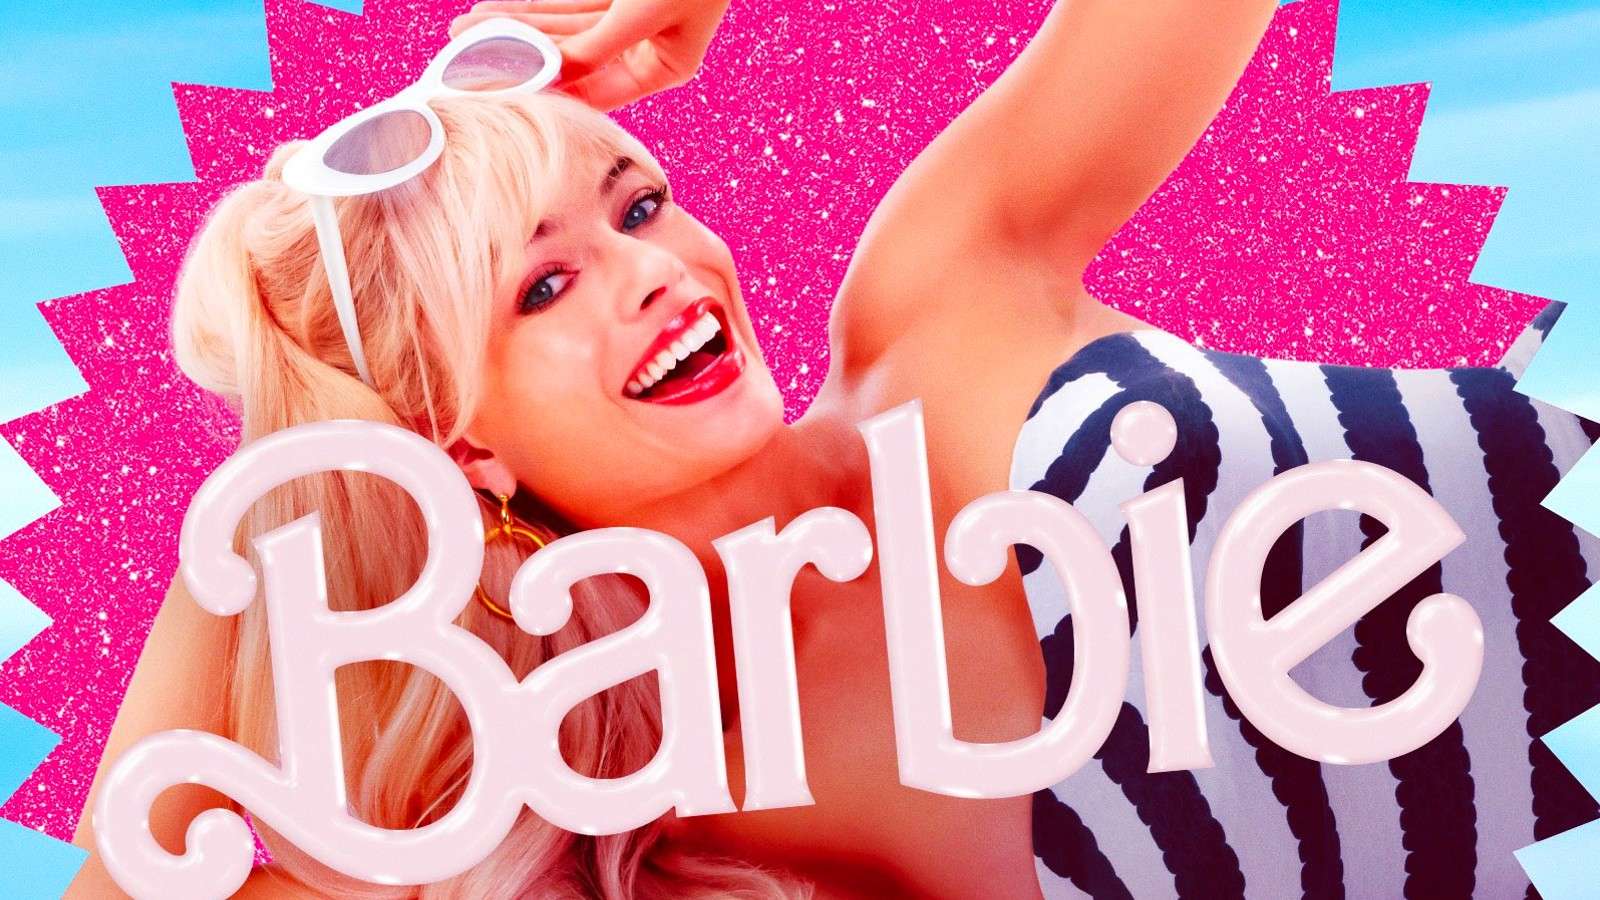 Margot Robbie in a poster for the Barbie movie